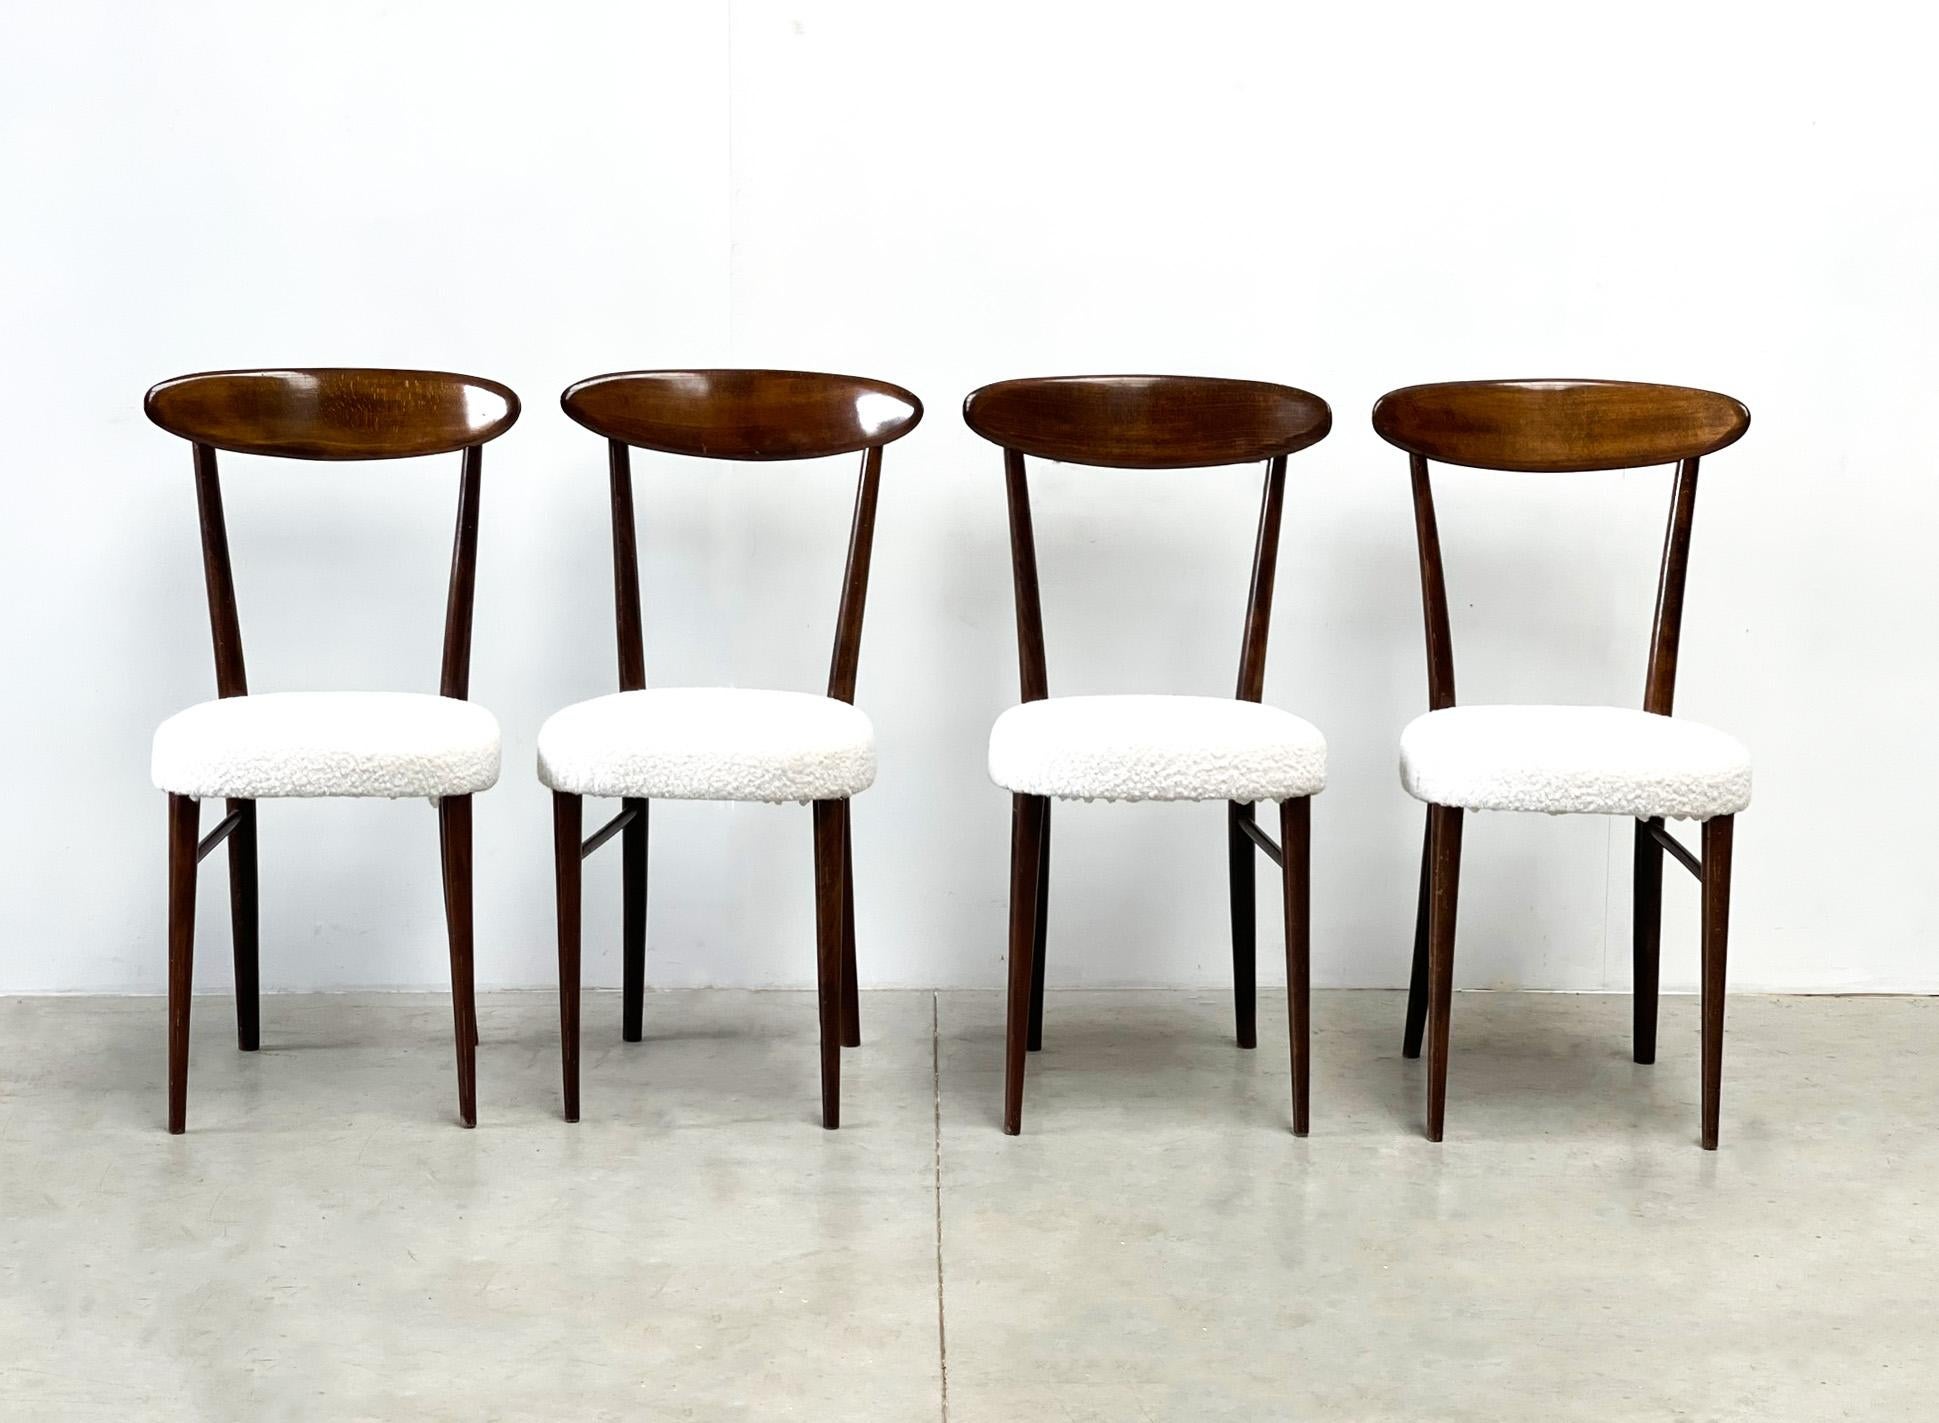 Very elegant mid century italian dining chairs newly upholstered in white bouclé fabric. 

Nicely crafted wooden frames from a very high quality. 

1960s - Italy

Dimensions:
Height: 79cm/31.10